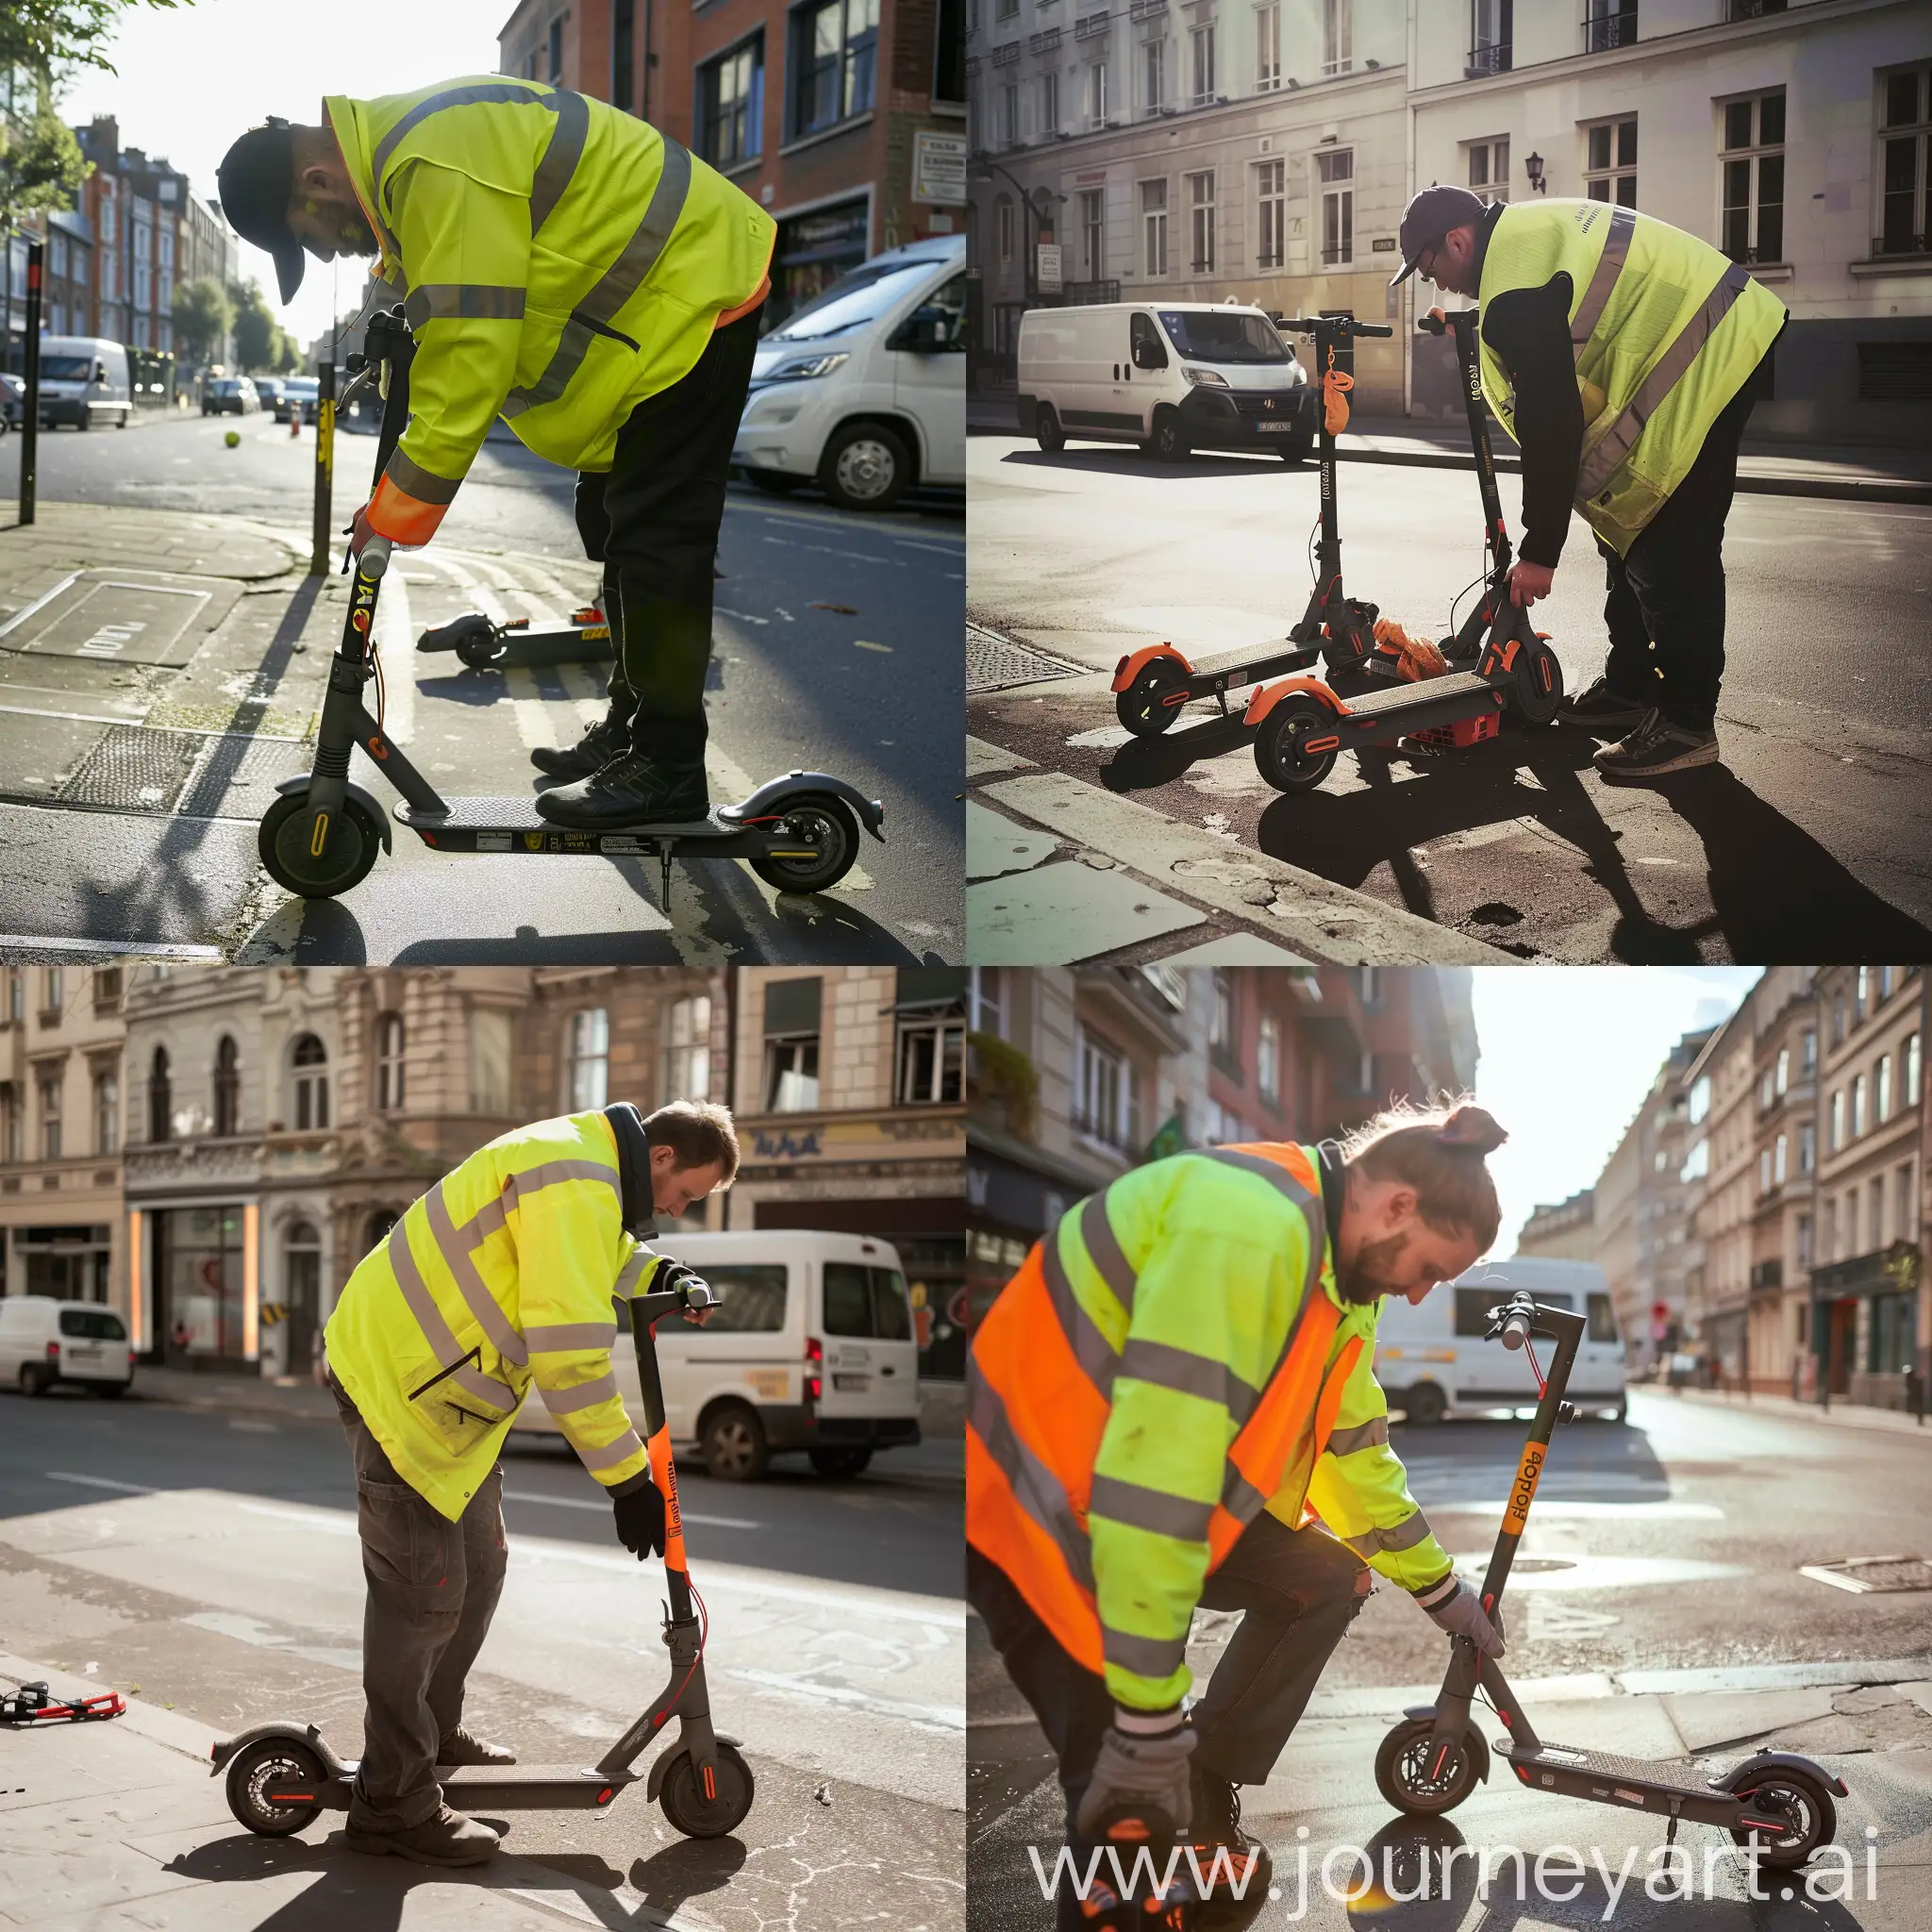 Urban-Worker-in-HighVisibility-Jacket-Inspecting-Kickscooter-on-Sunny-City-Street